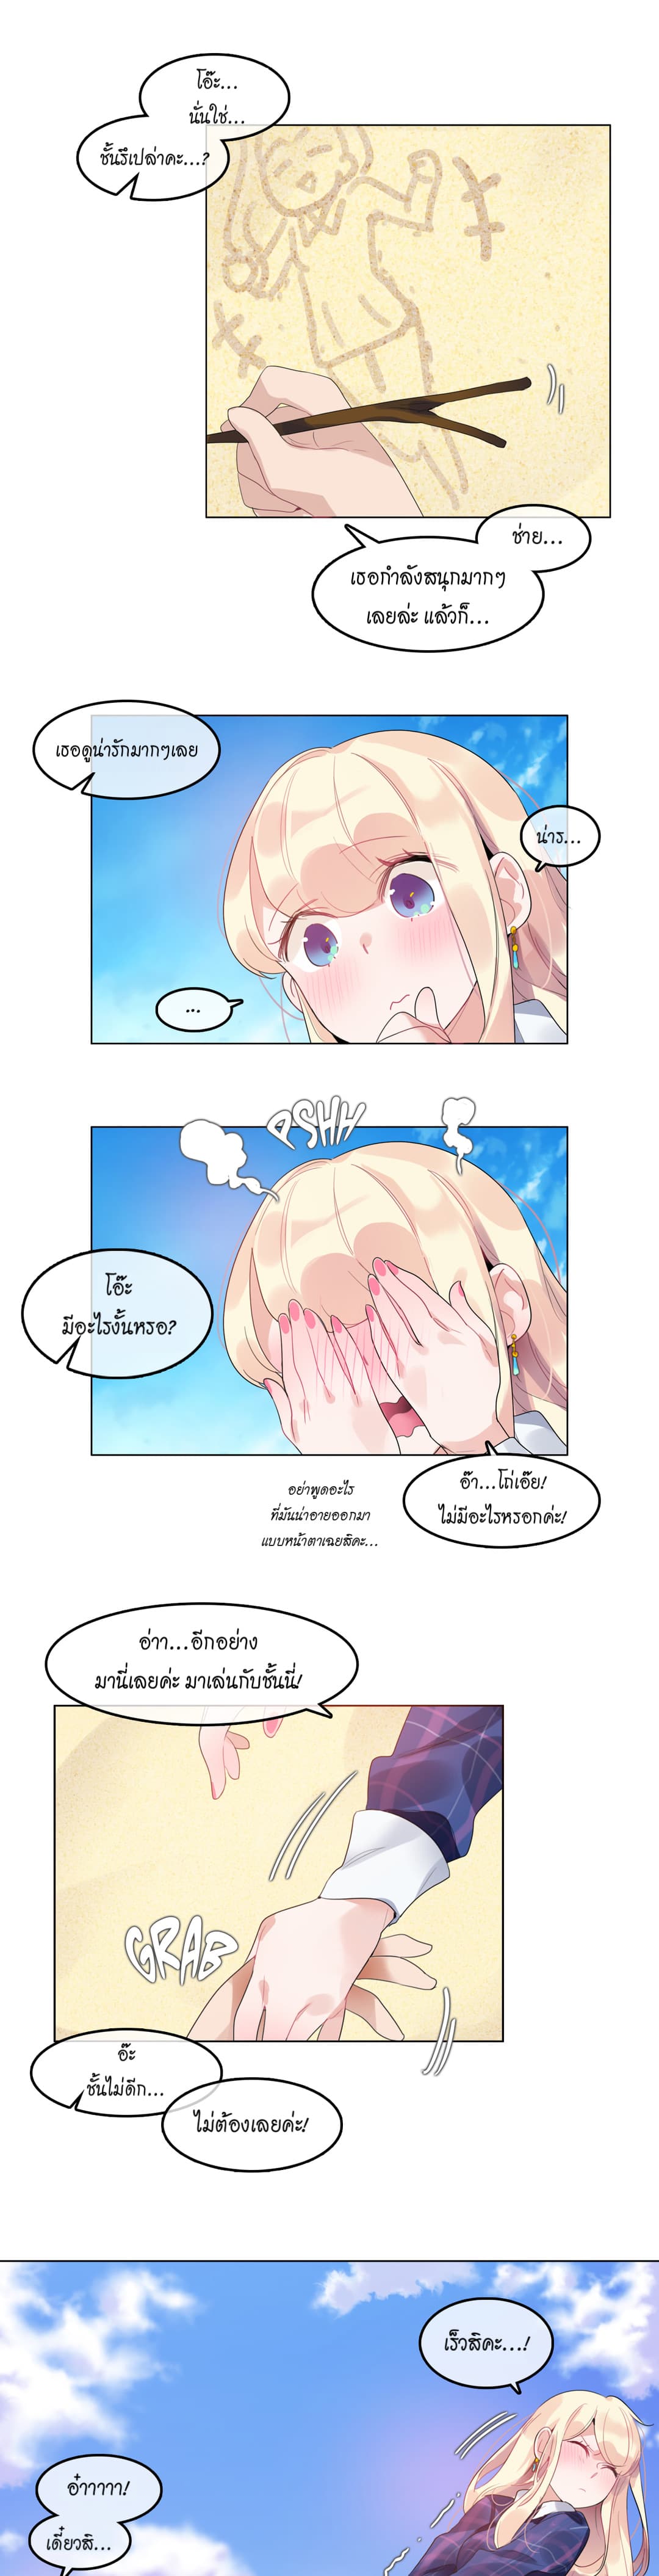 A Pervert’s Daily Life 43 (7)